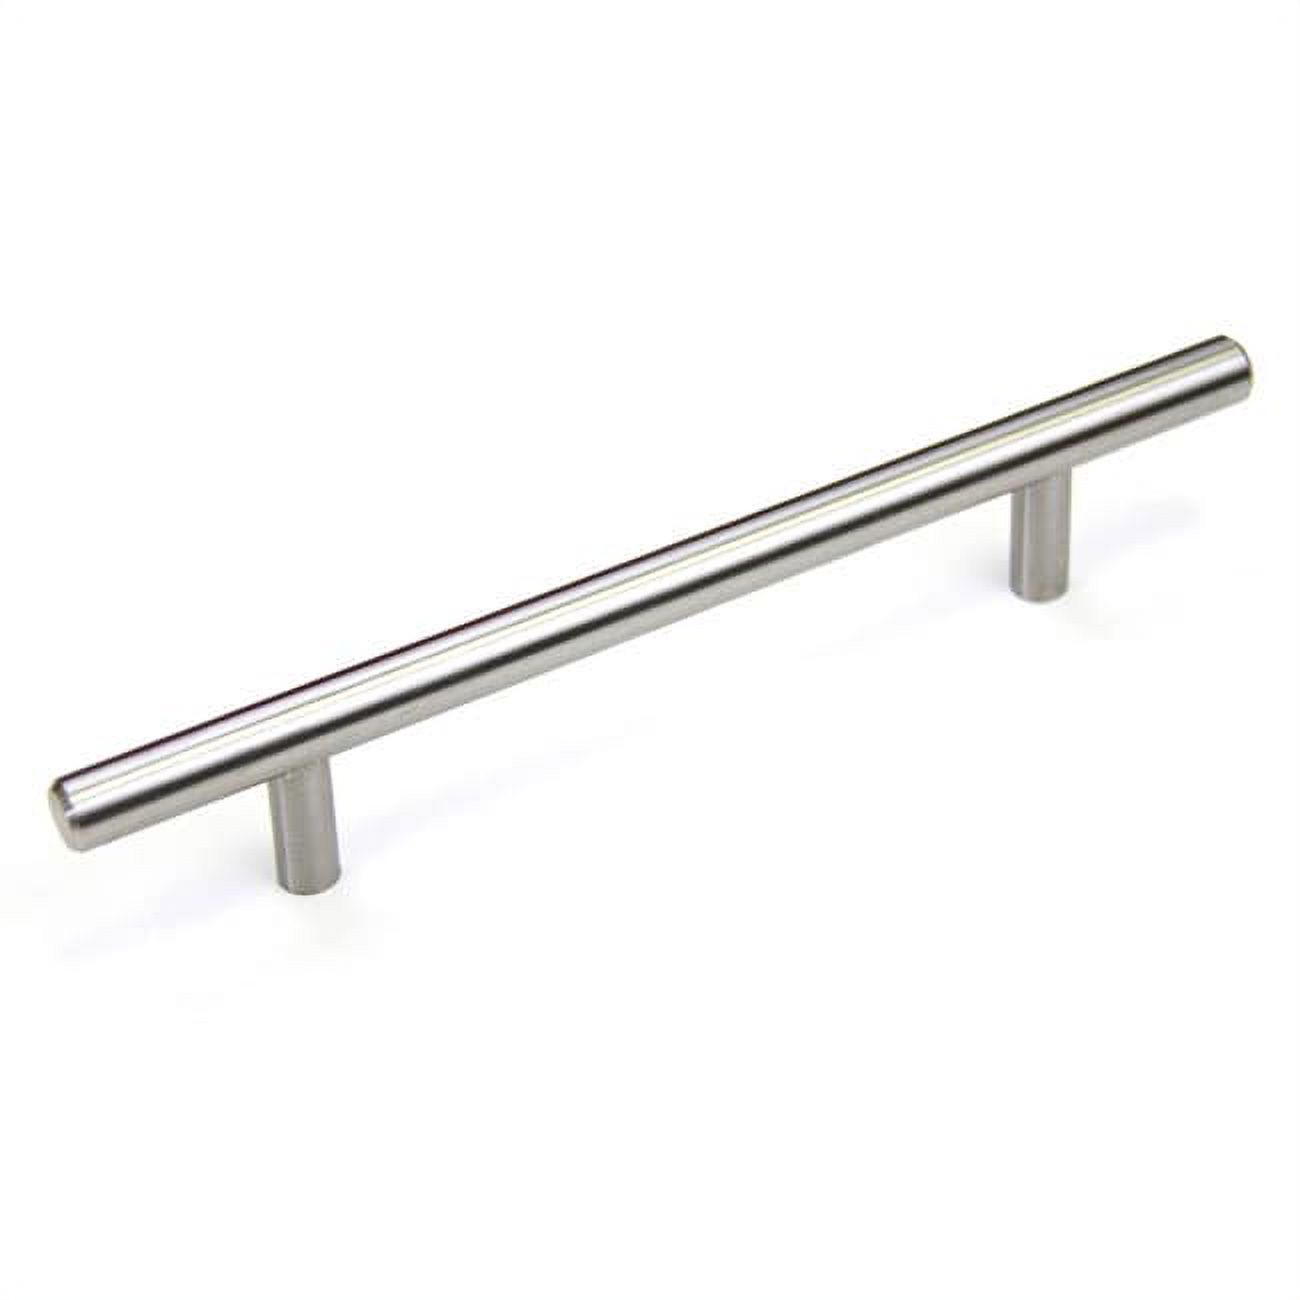 8" Solid Stainless Steel Cabinet Bar Pull Handles Stainless Steel 8-inch Cabinet Bar Pull Handles (Case of 15) - image 1 of 3